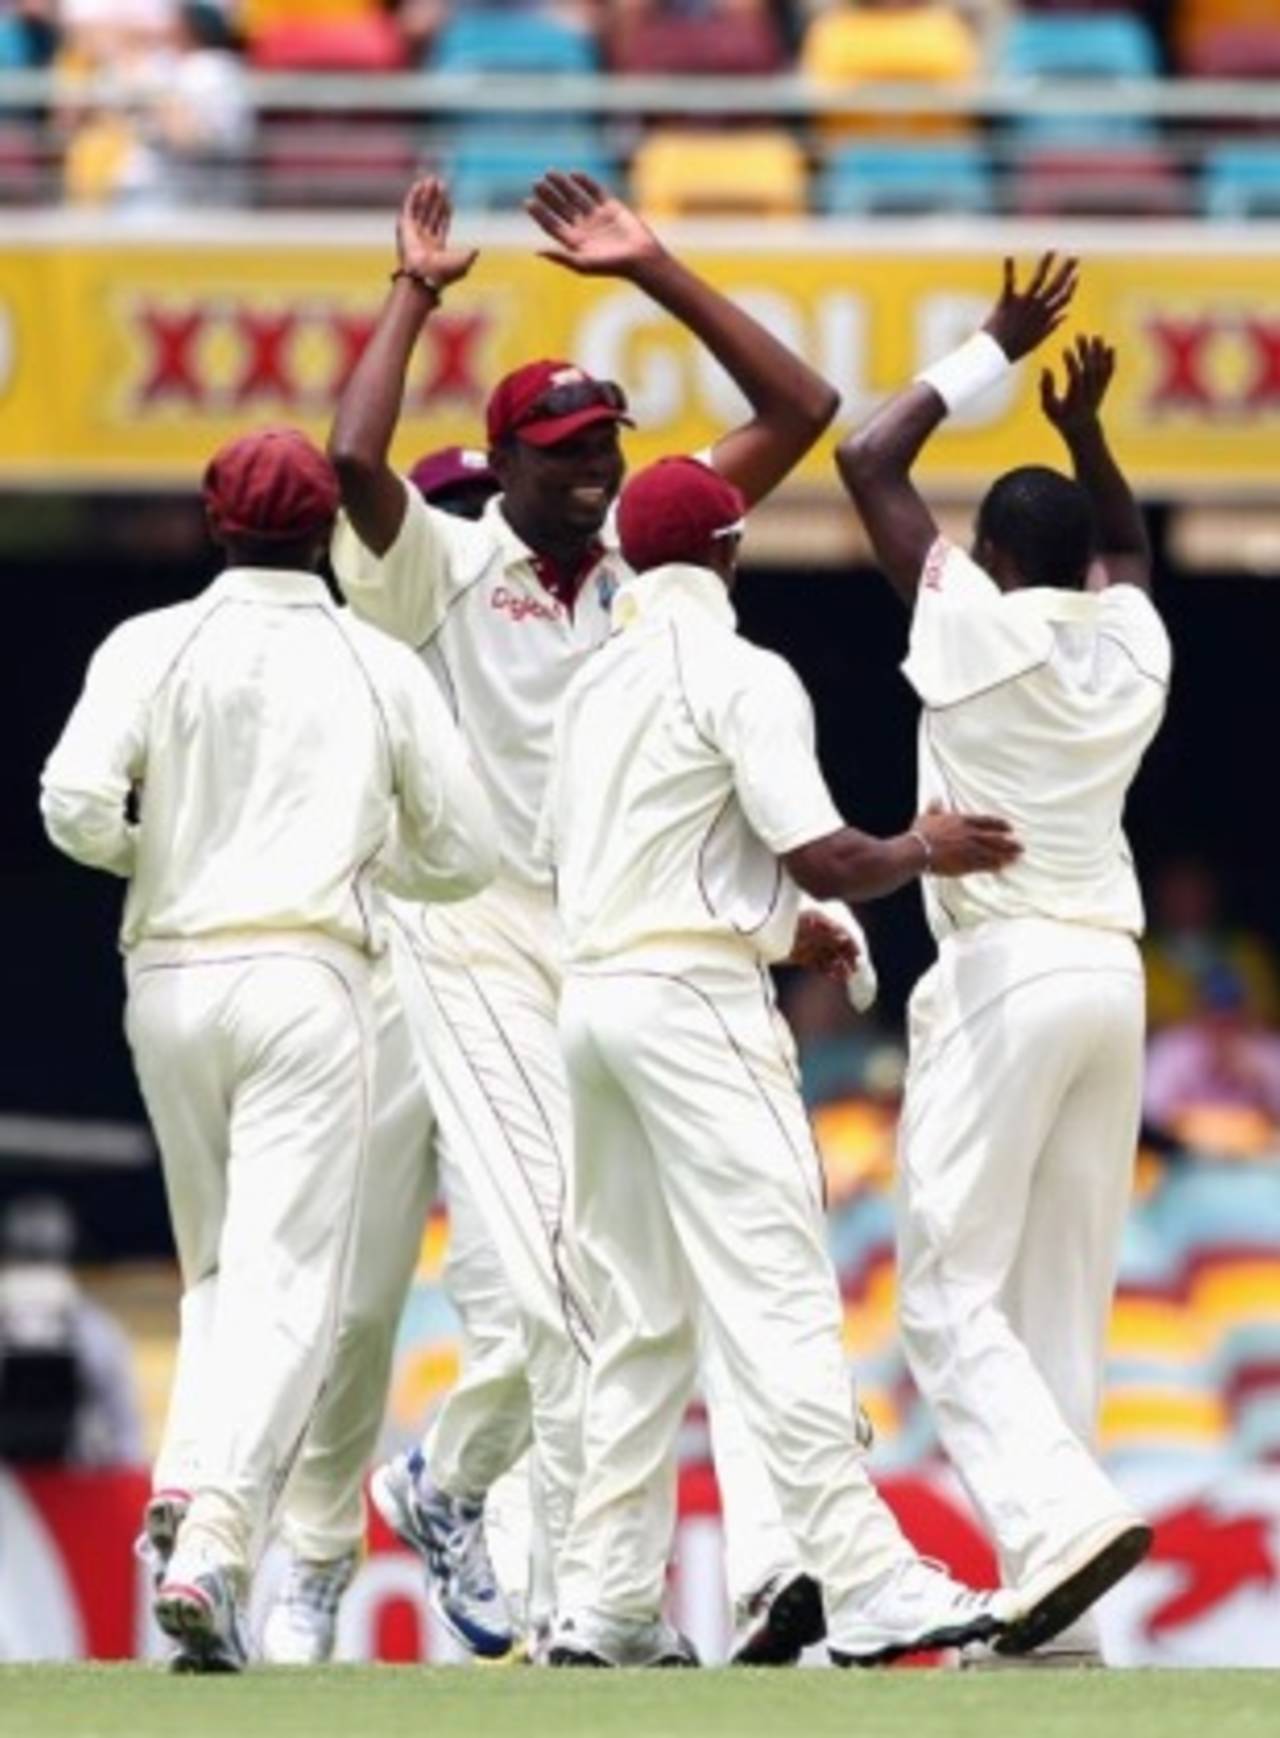 The West Indies players congratulate Jerome Taylor on removing Shane Watson, Australia v West Indies, 1st Test, Brisbane, 1st day, November 26, 2009